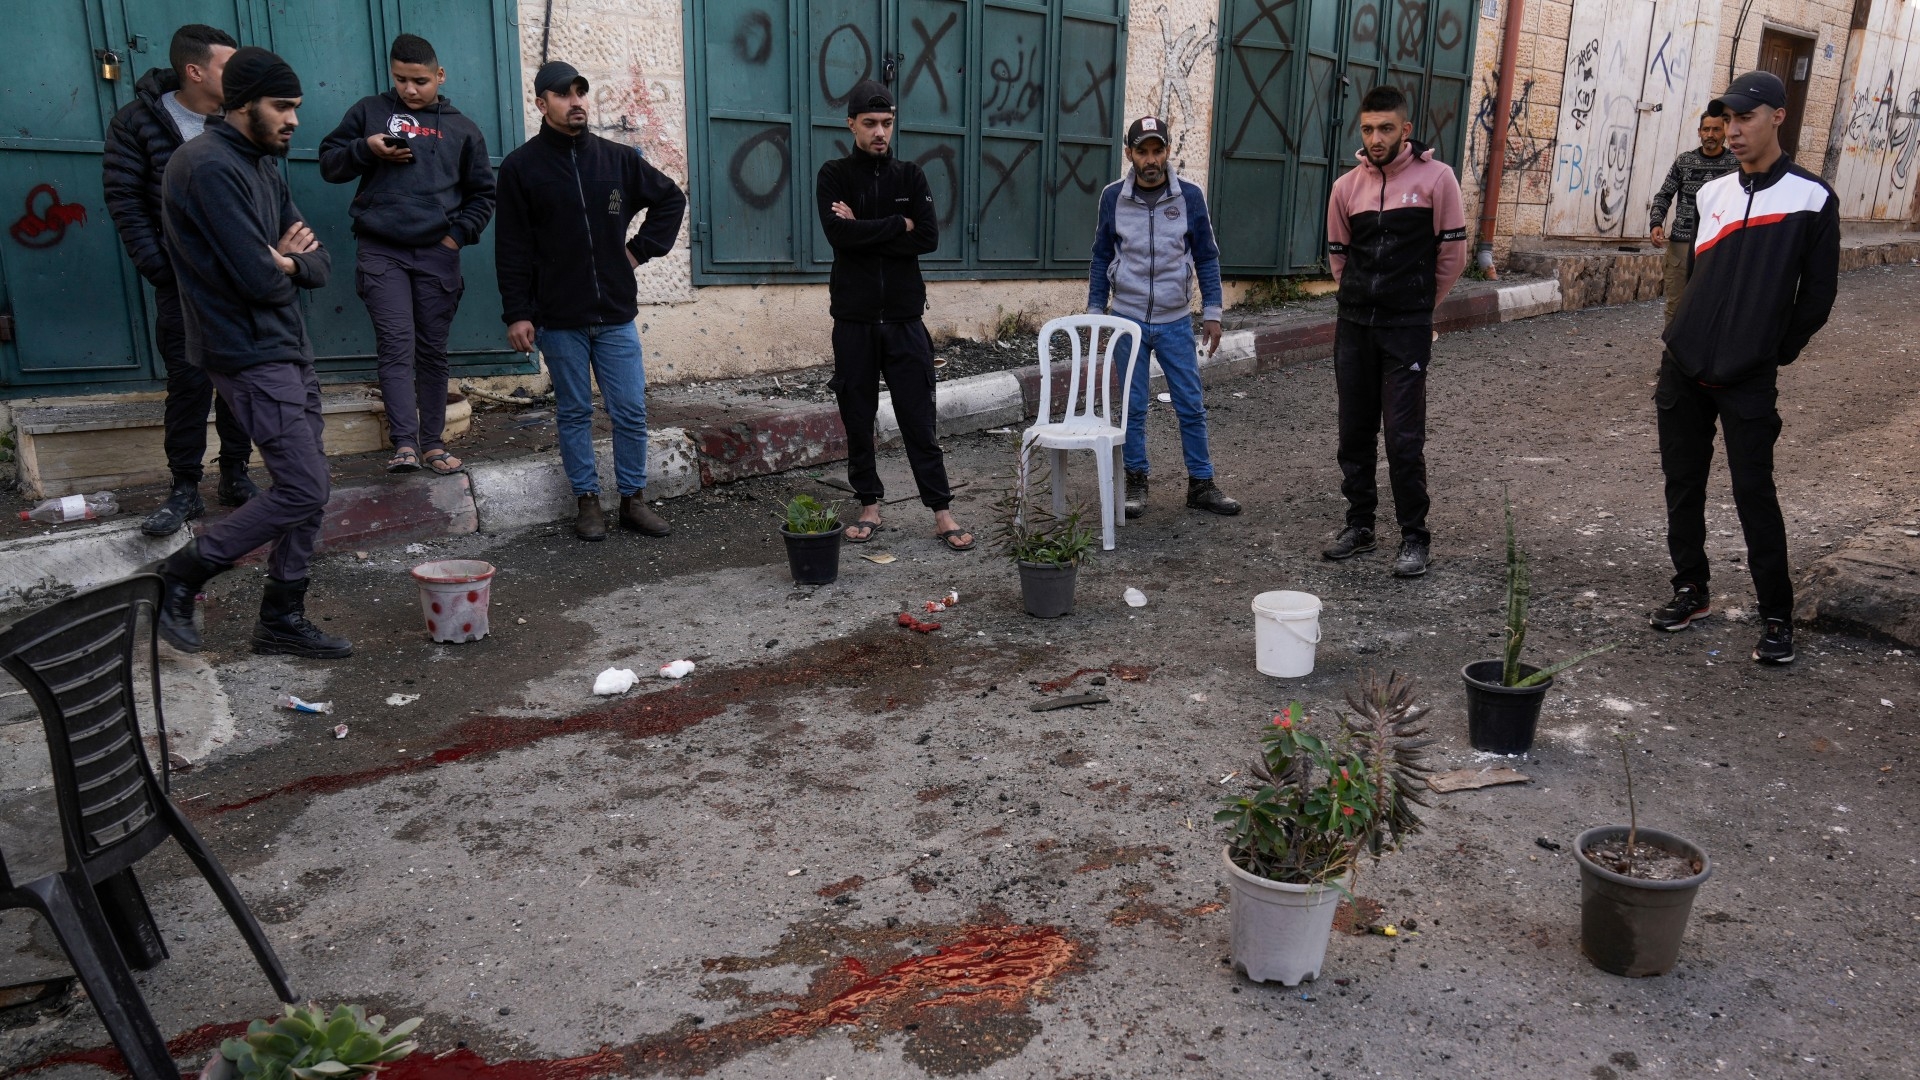 Palestinians look at a blood stain at the site of the Israeli drone strike in Jenin, 12 December (AP)